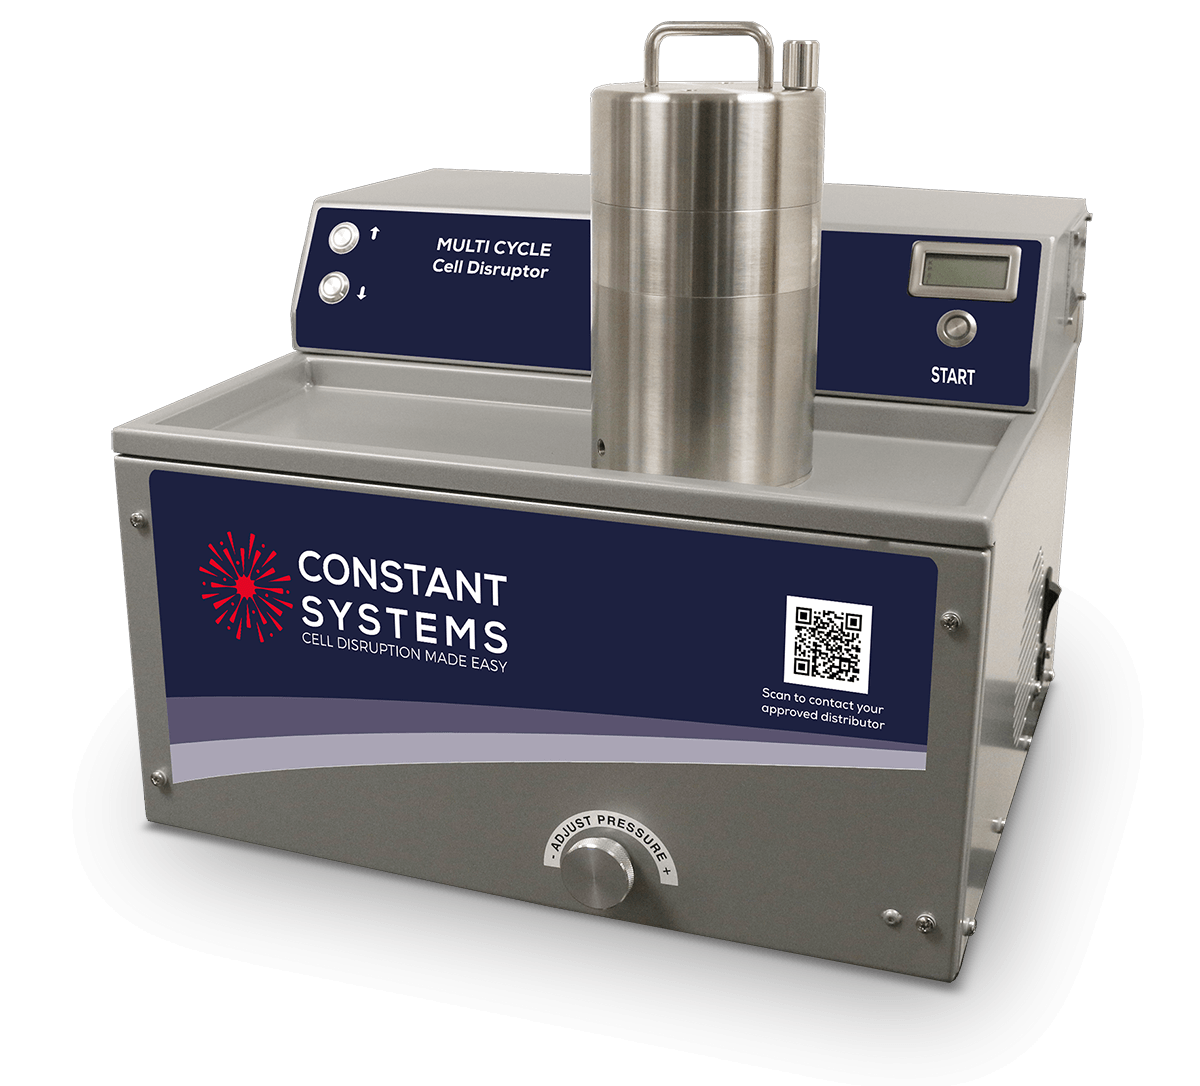 Constant Systems Multi Cycle Cell Disruptor High pressure homogenizer